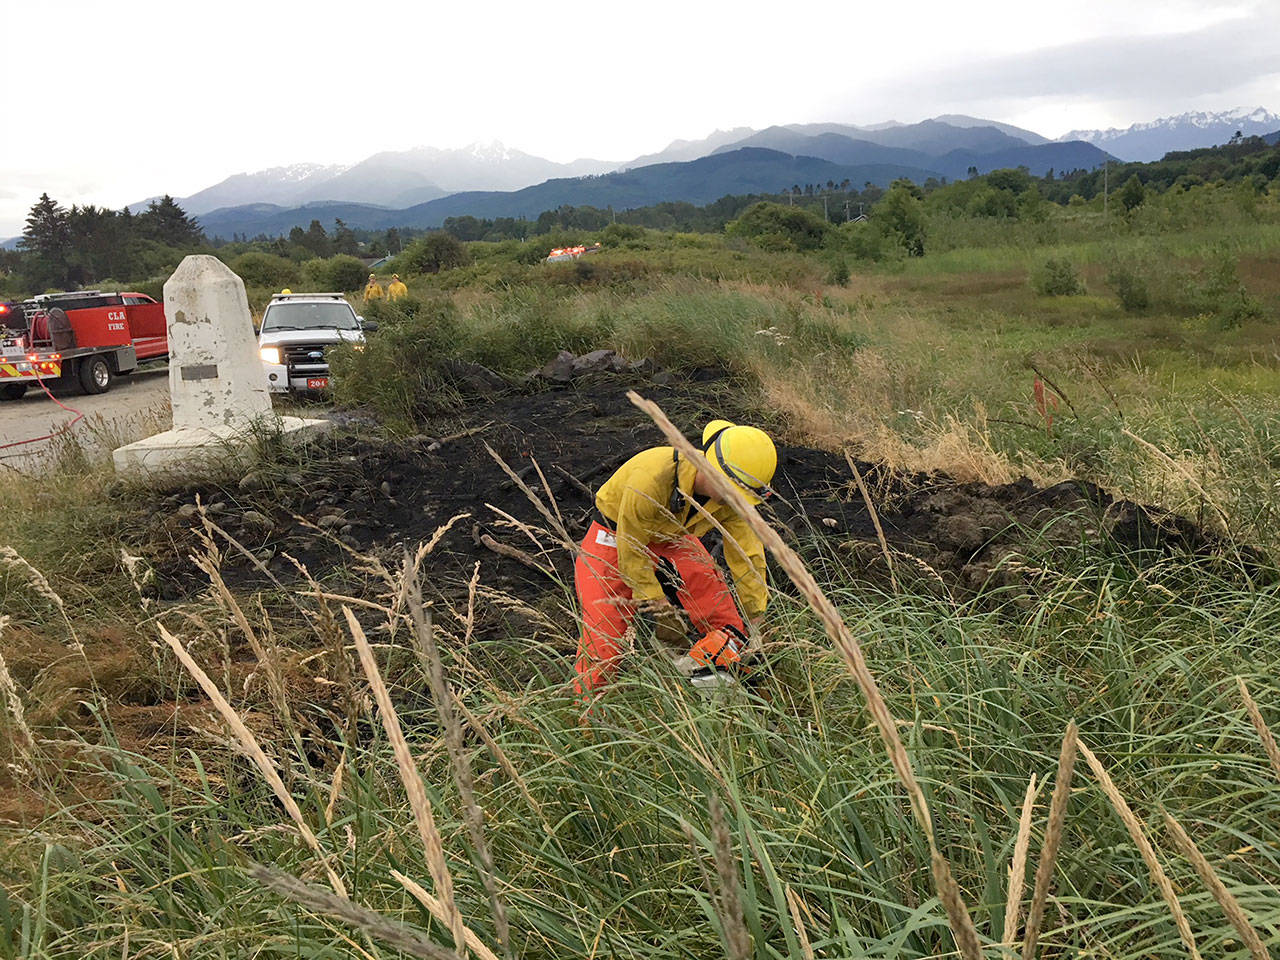 Clallam Fire District No. 2 responded to a brush fire at 400 Charles Road early Wednesday evening. It is believed the fire was started by fireworks. (Clallam Fire District No. 2)